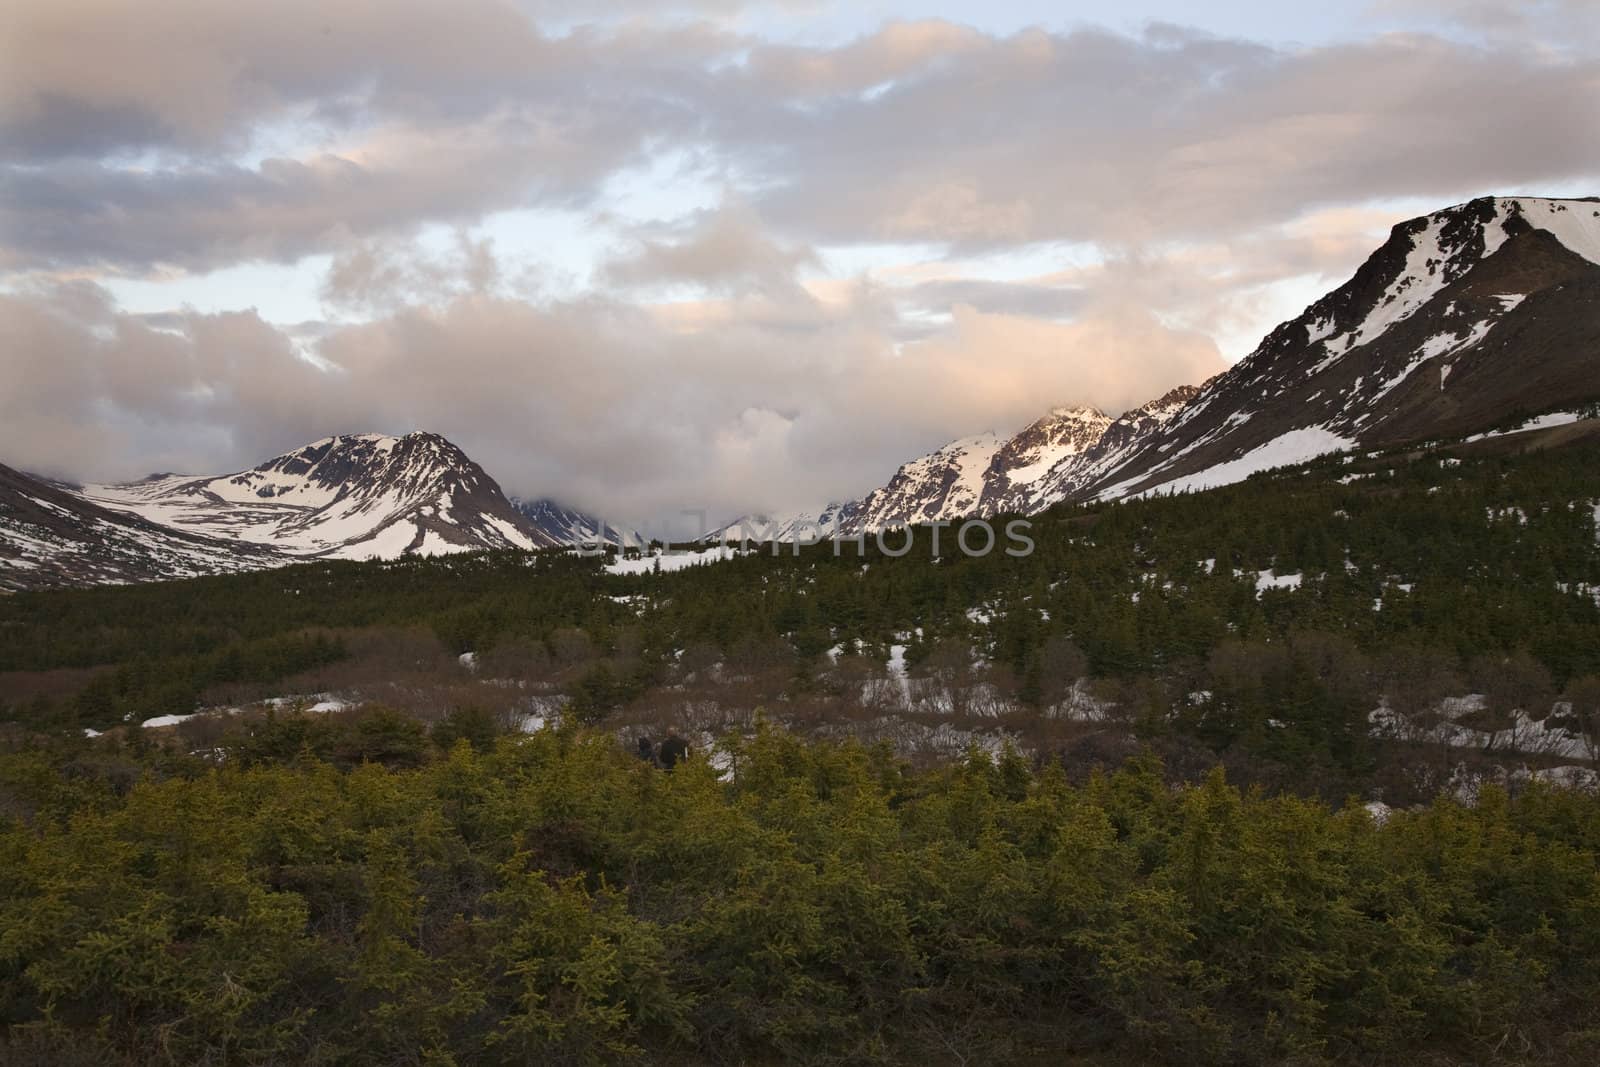 Hiking Flattop Mountain at Sunset Anchorage Alaska by bill_perry